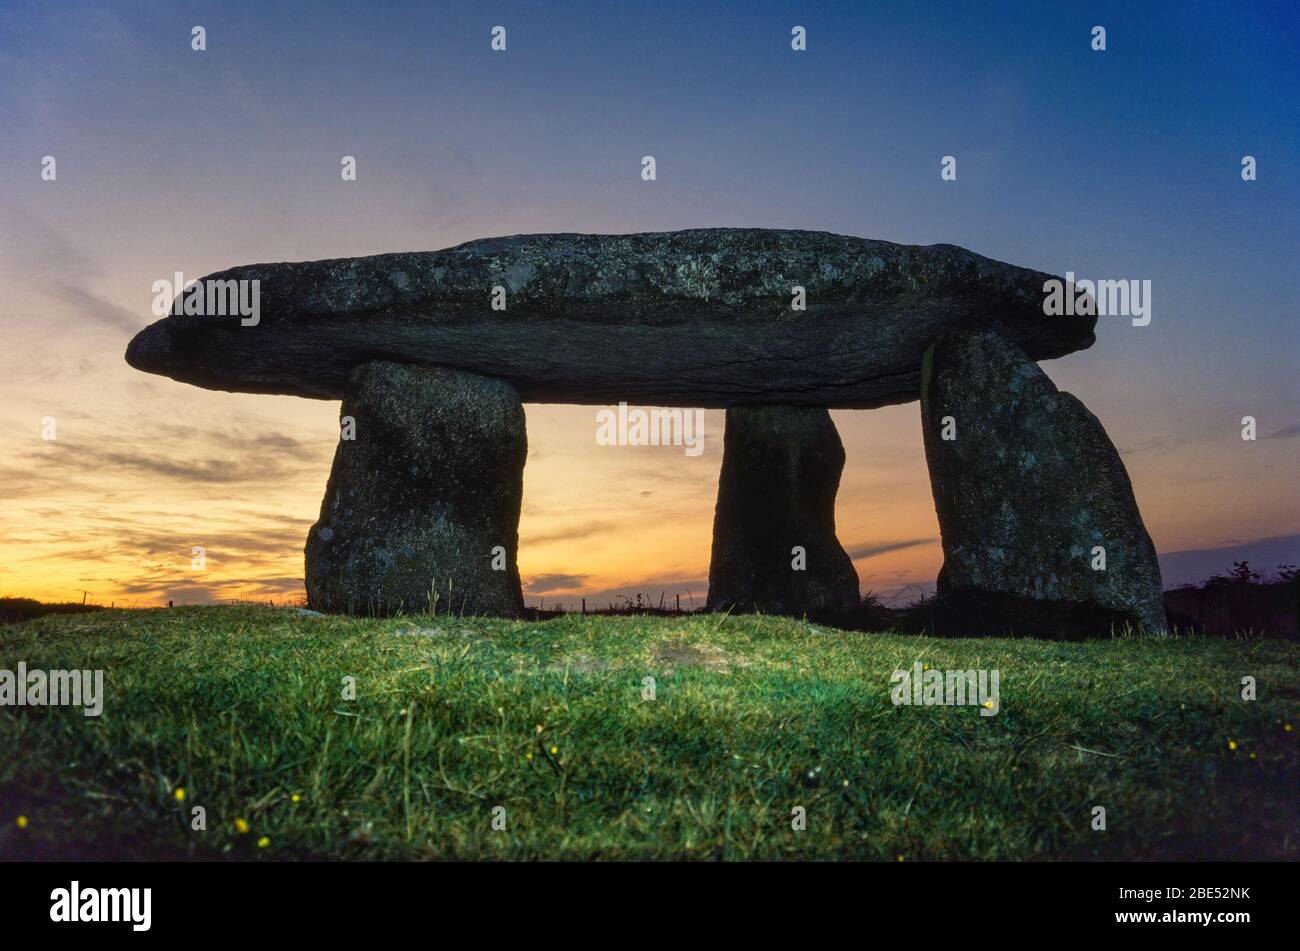 Lanyon Quoit (also known as Giant's table) ancient standing stones at sunset, Madron, Cornwall, England, UK Stock Photo